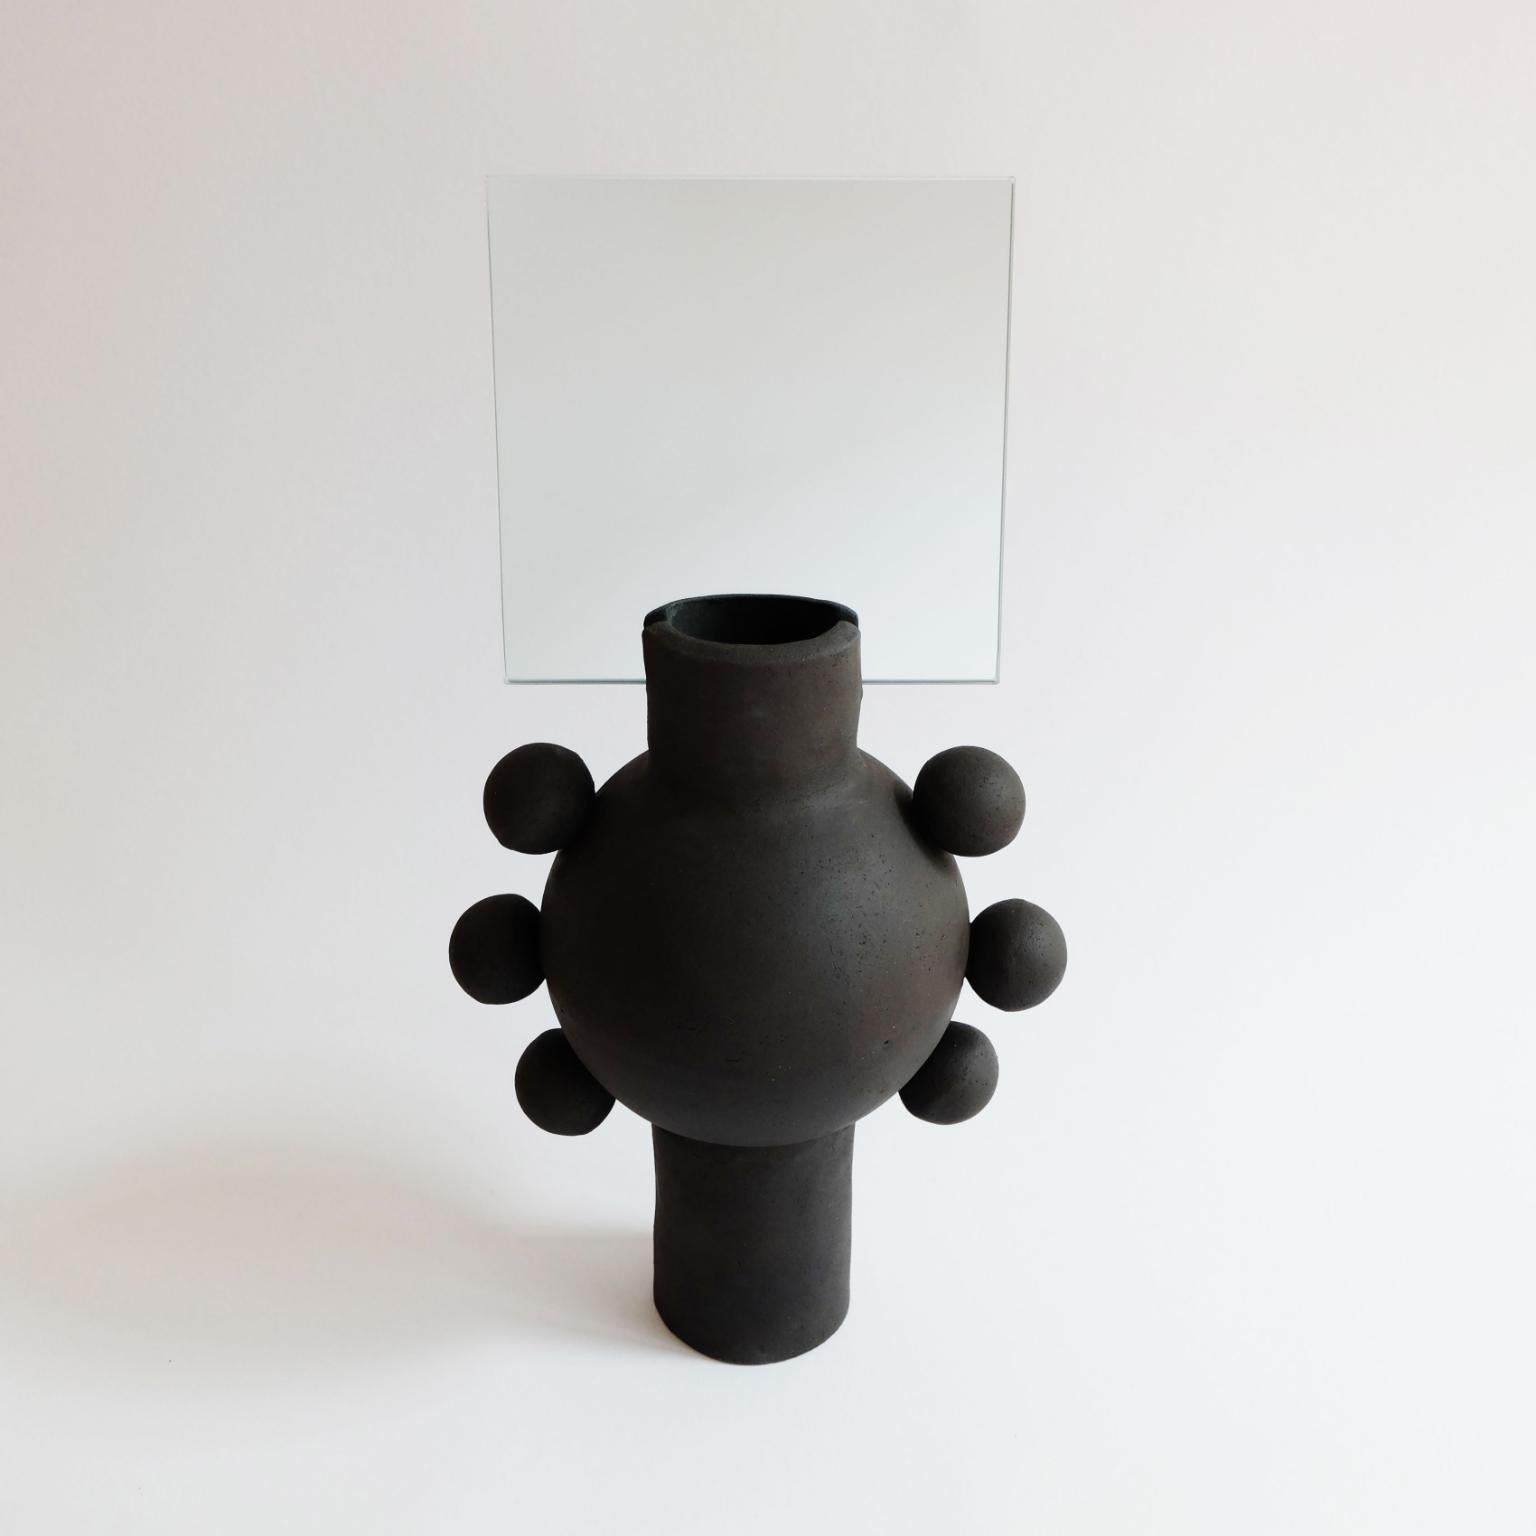 Unique UFO mirror by Ia Kutateladze
Dimensions: W 19 x H 38 cm
Materials: Raw black clay

UFO 01 is a hand built ceramic mirror. Playful and bold functional decorative object, for various types of interiors.

IAAI / Ia Kutateladze is a